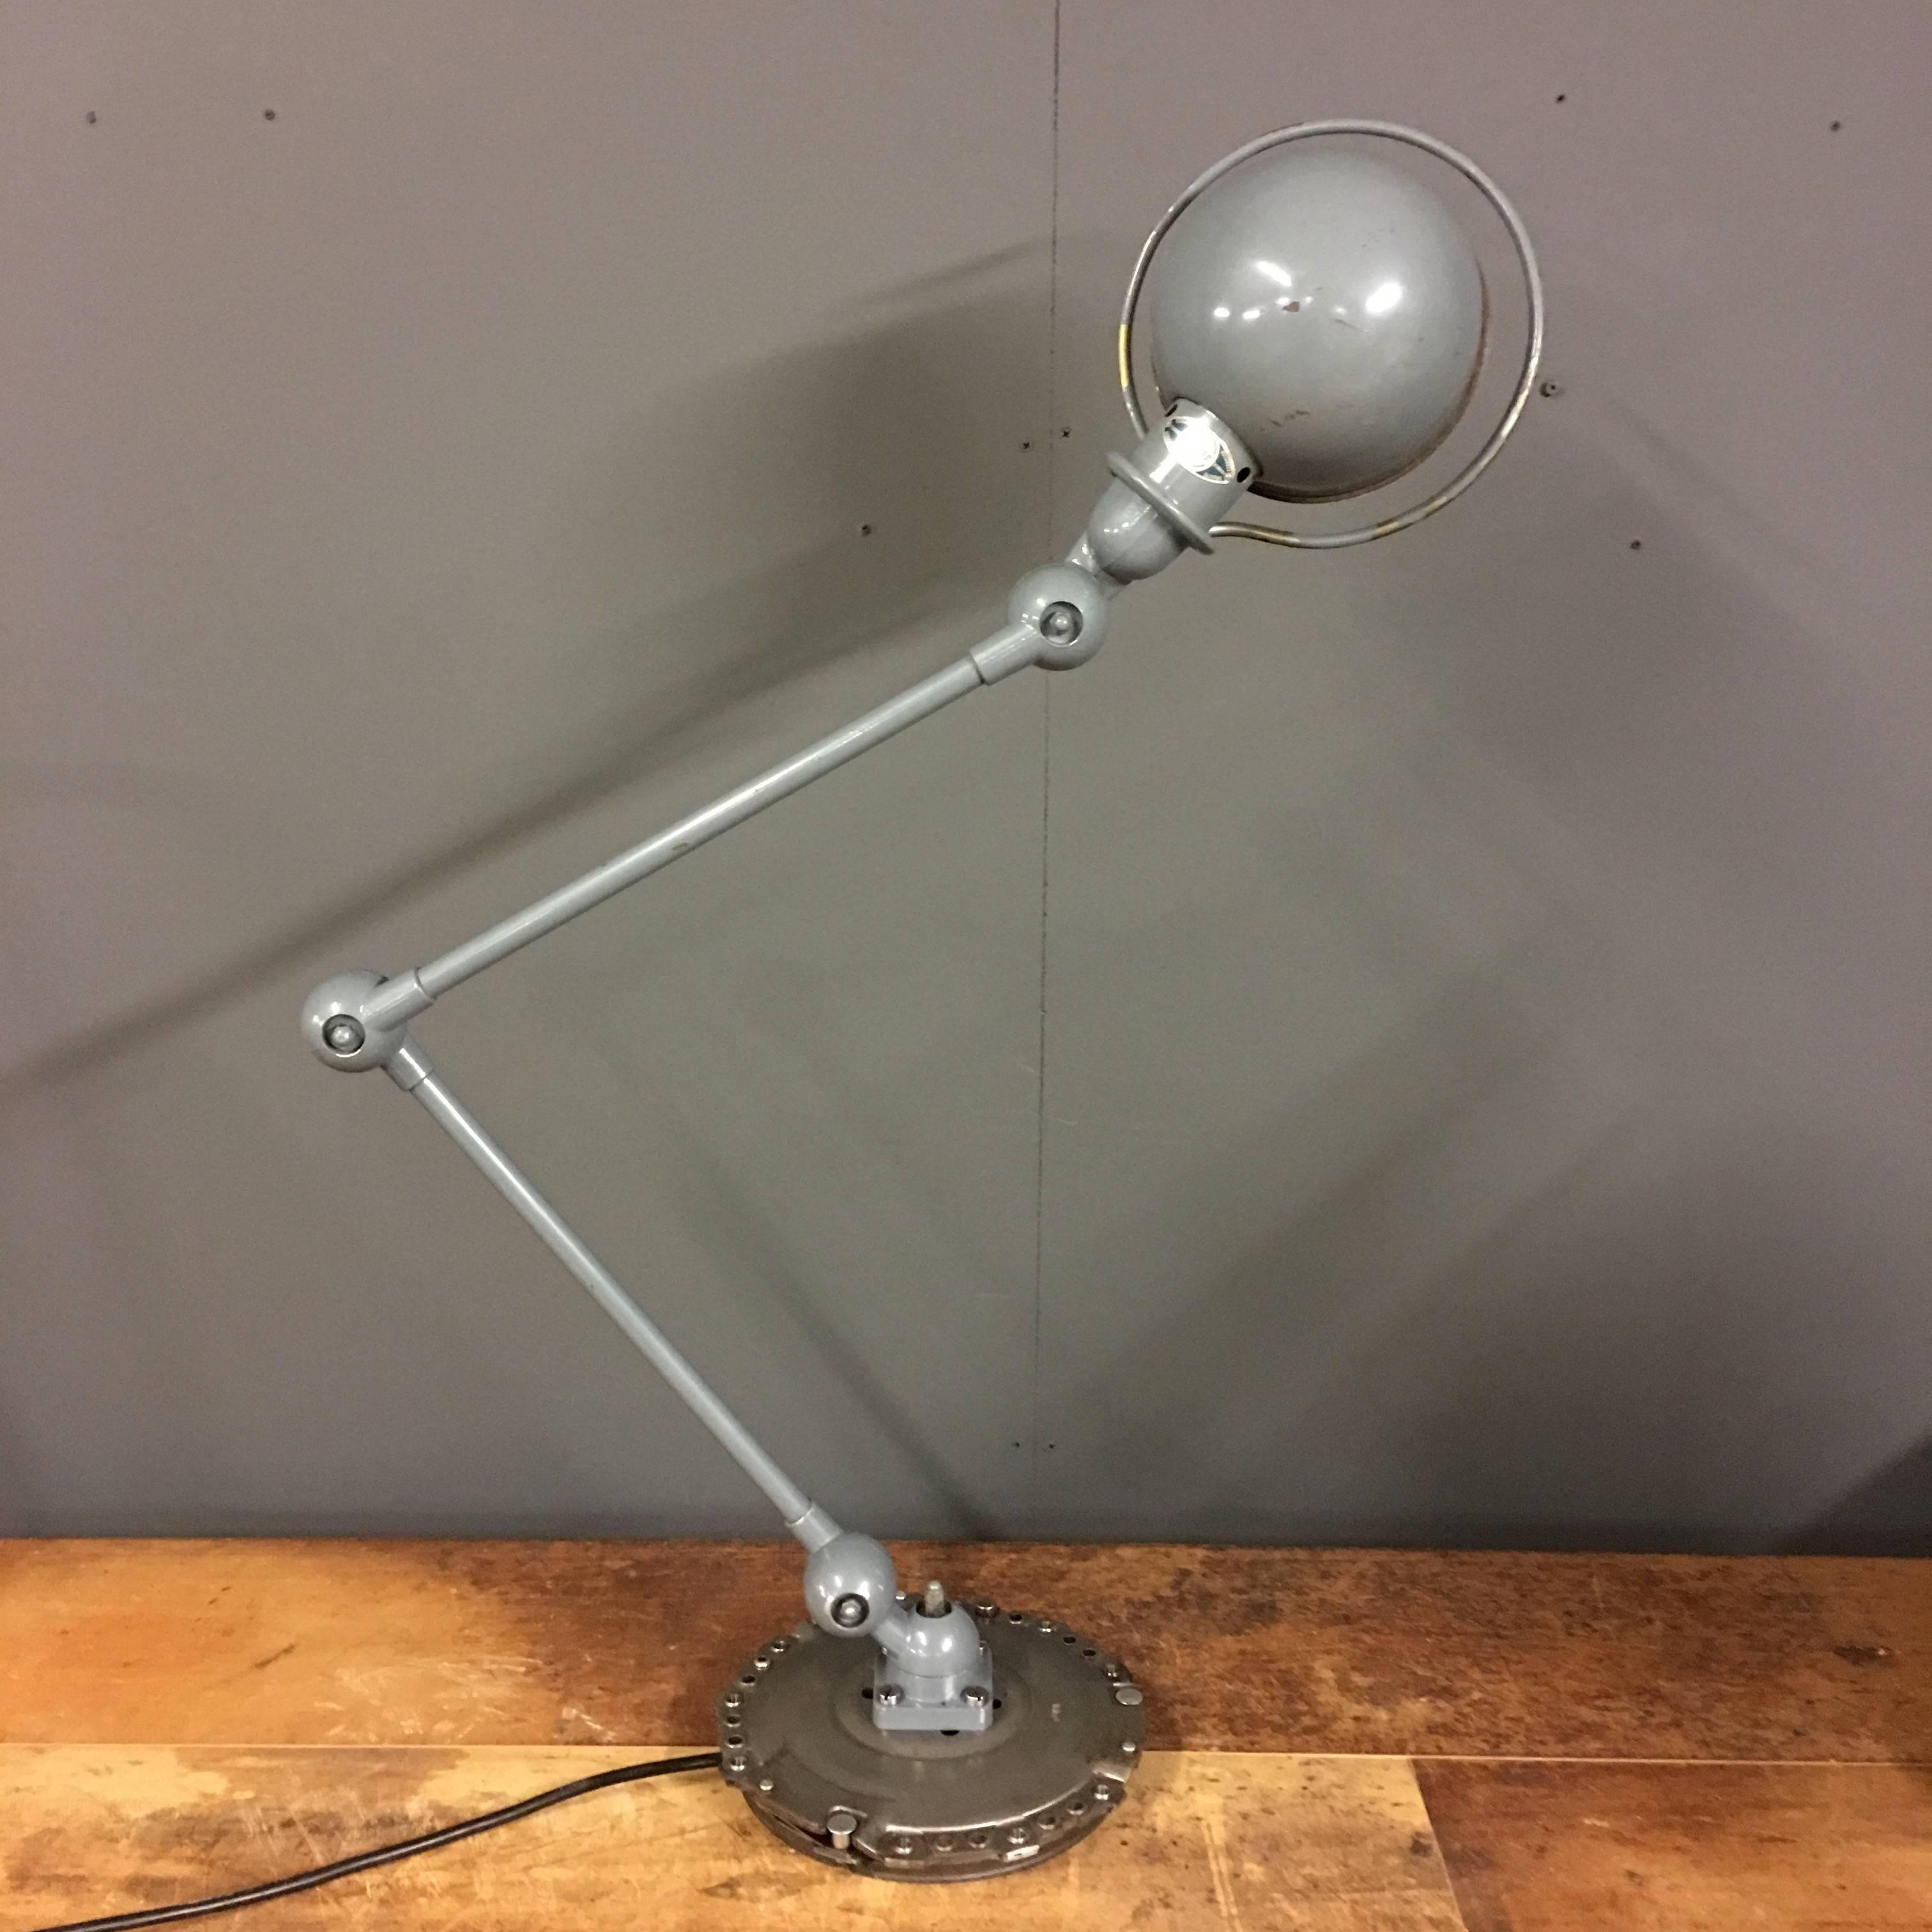 Industrial workshop light by Jean Domecq for Jieldé. Manufactured in France during the 1950s. Adjustable at all joints, converted to E27 socket. This model is mounted on a Metal disc and remains in very good condition.